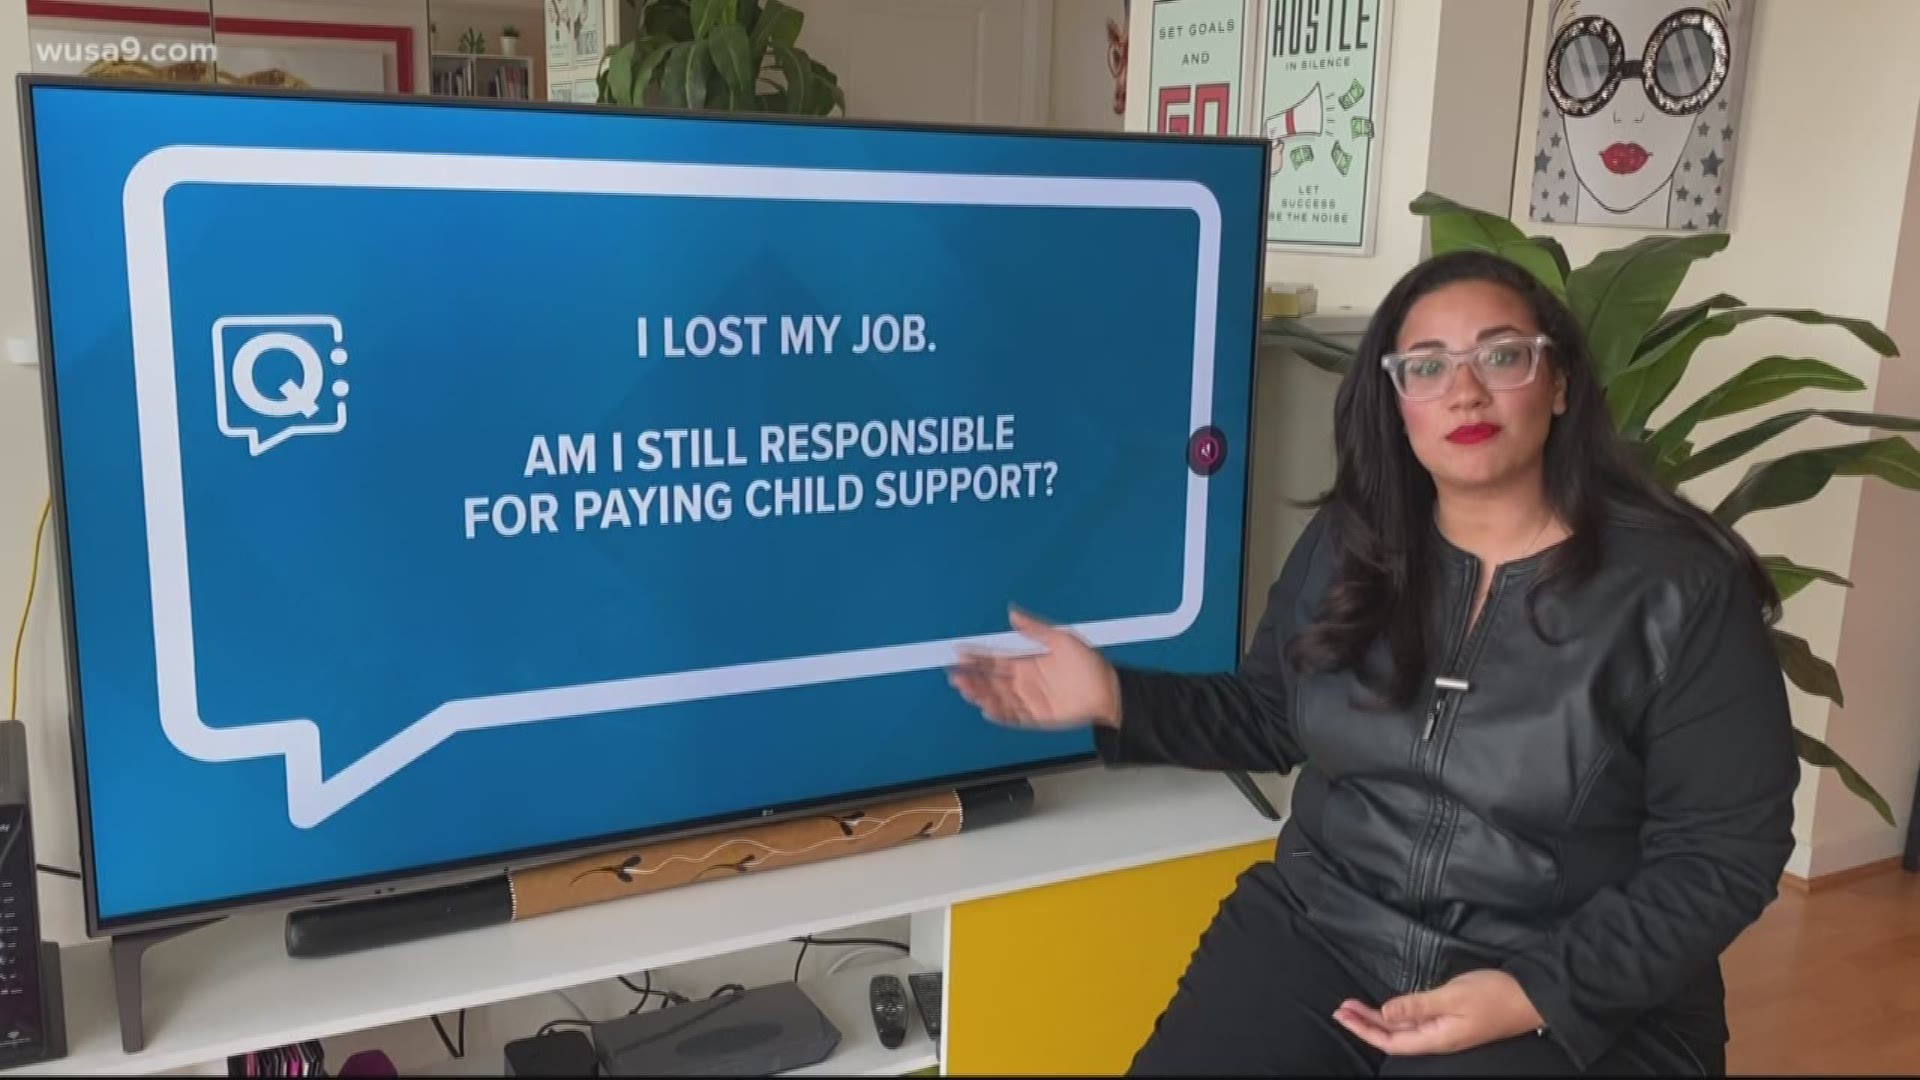 In this special Quick Questions, Ariane gets answers from specialists about handling child support payments during this difficult time